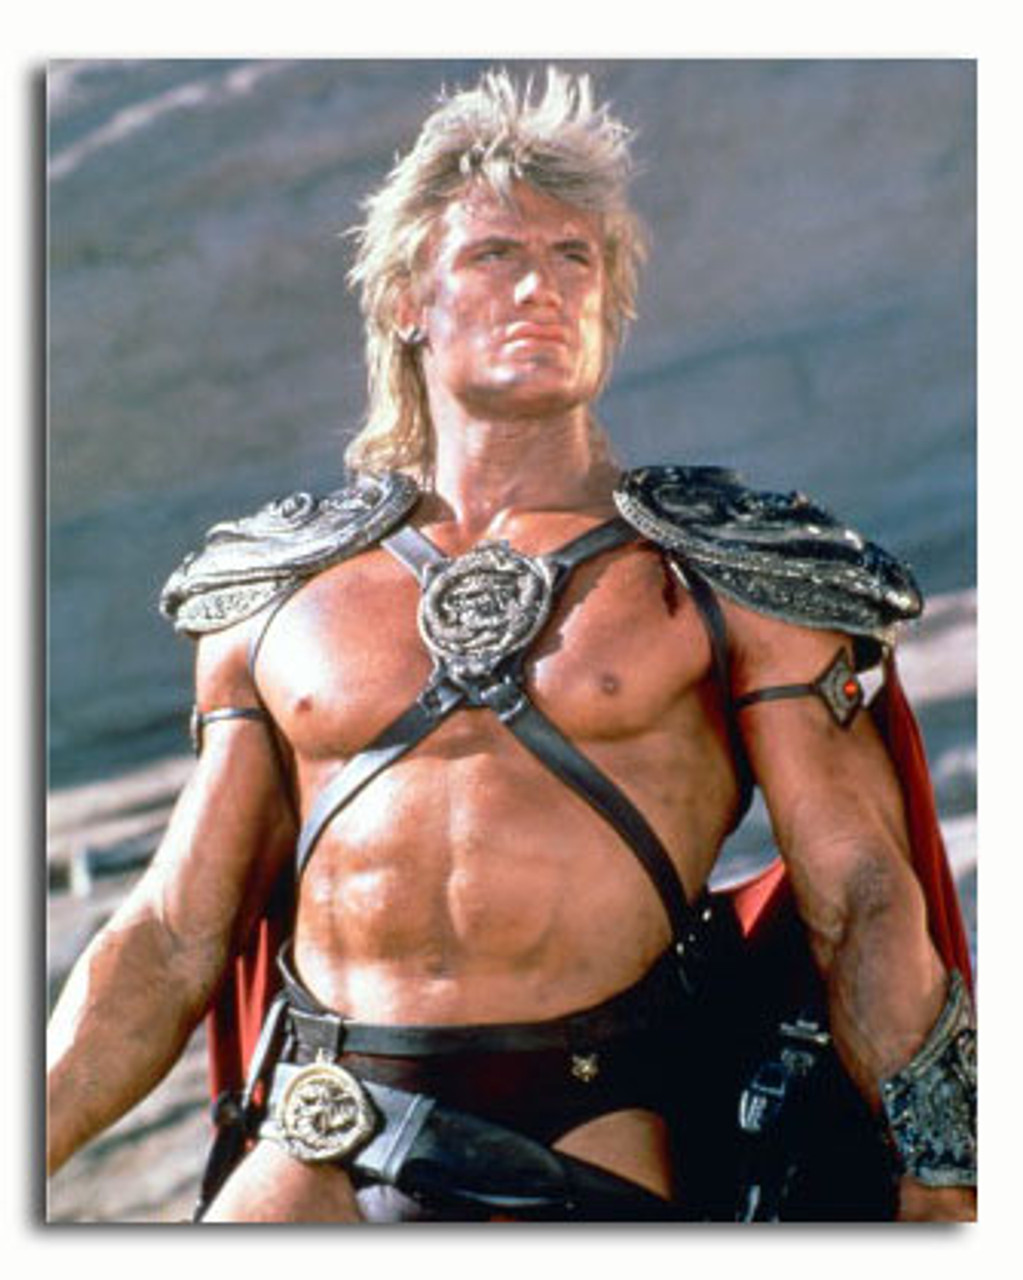 ss2780726_-_photograph_of_dolph_lundgren_as_he-man_from_masters_of_the_universe_available_in_4_sizes_framed_or_unframed_buy_now_at_starstills__90132__06810.1394491648.jpg